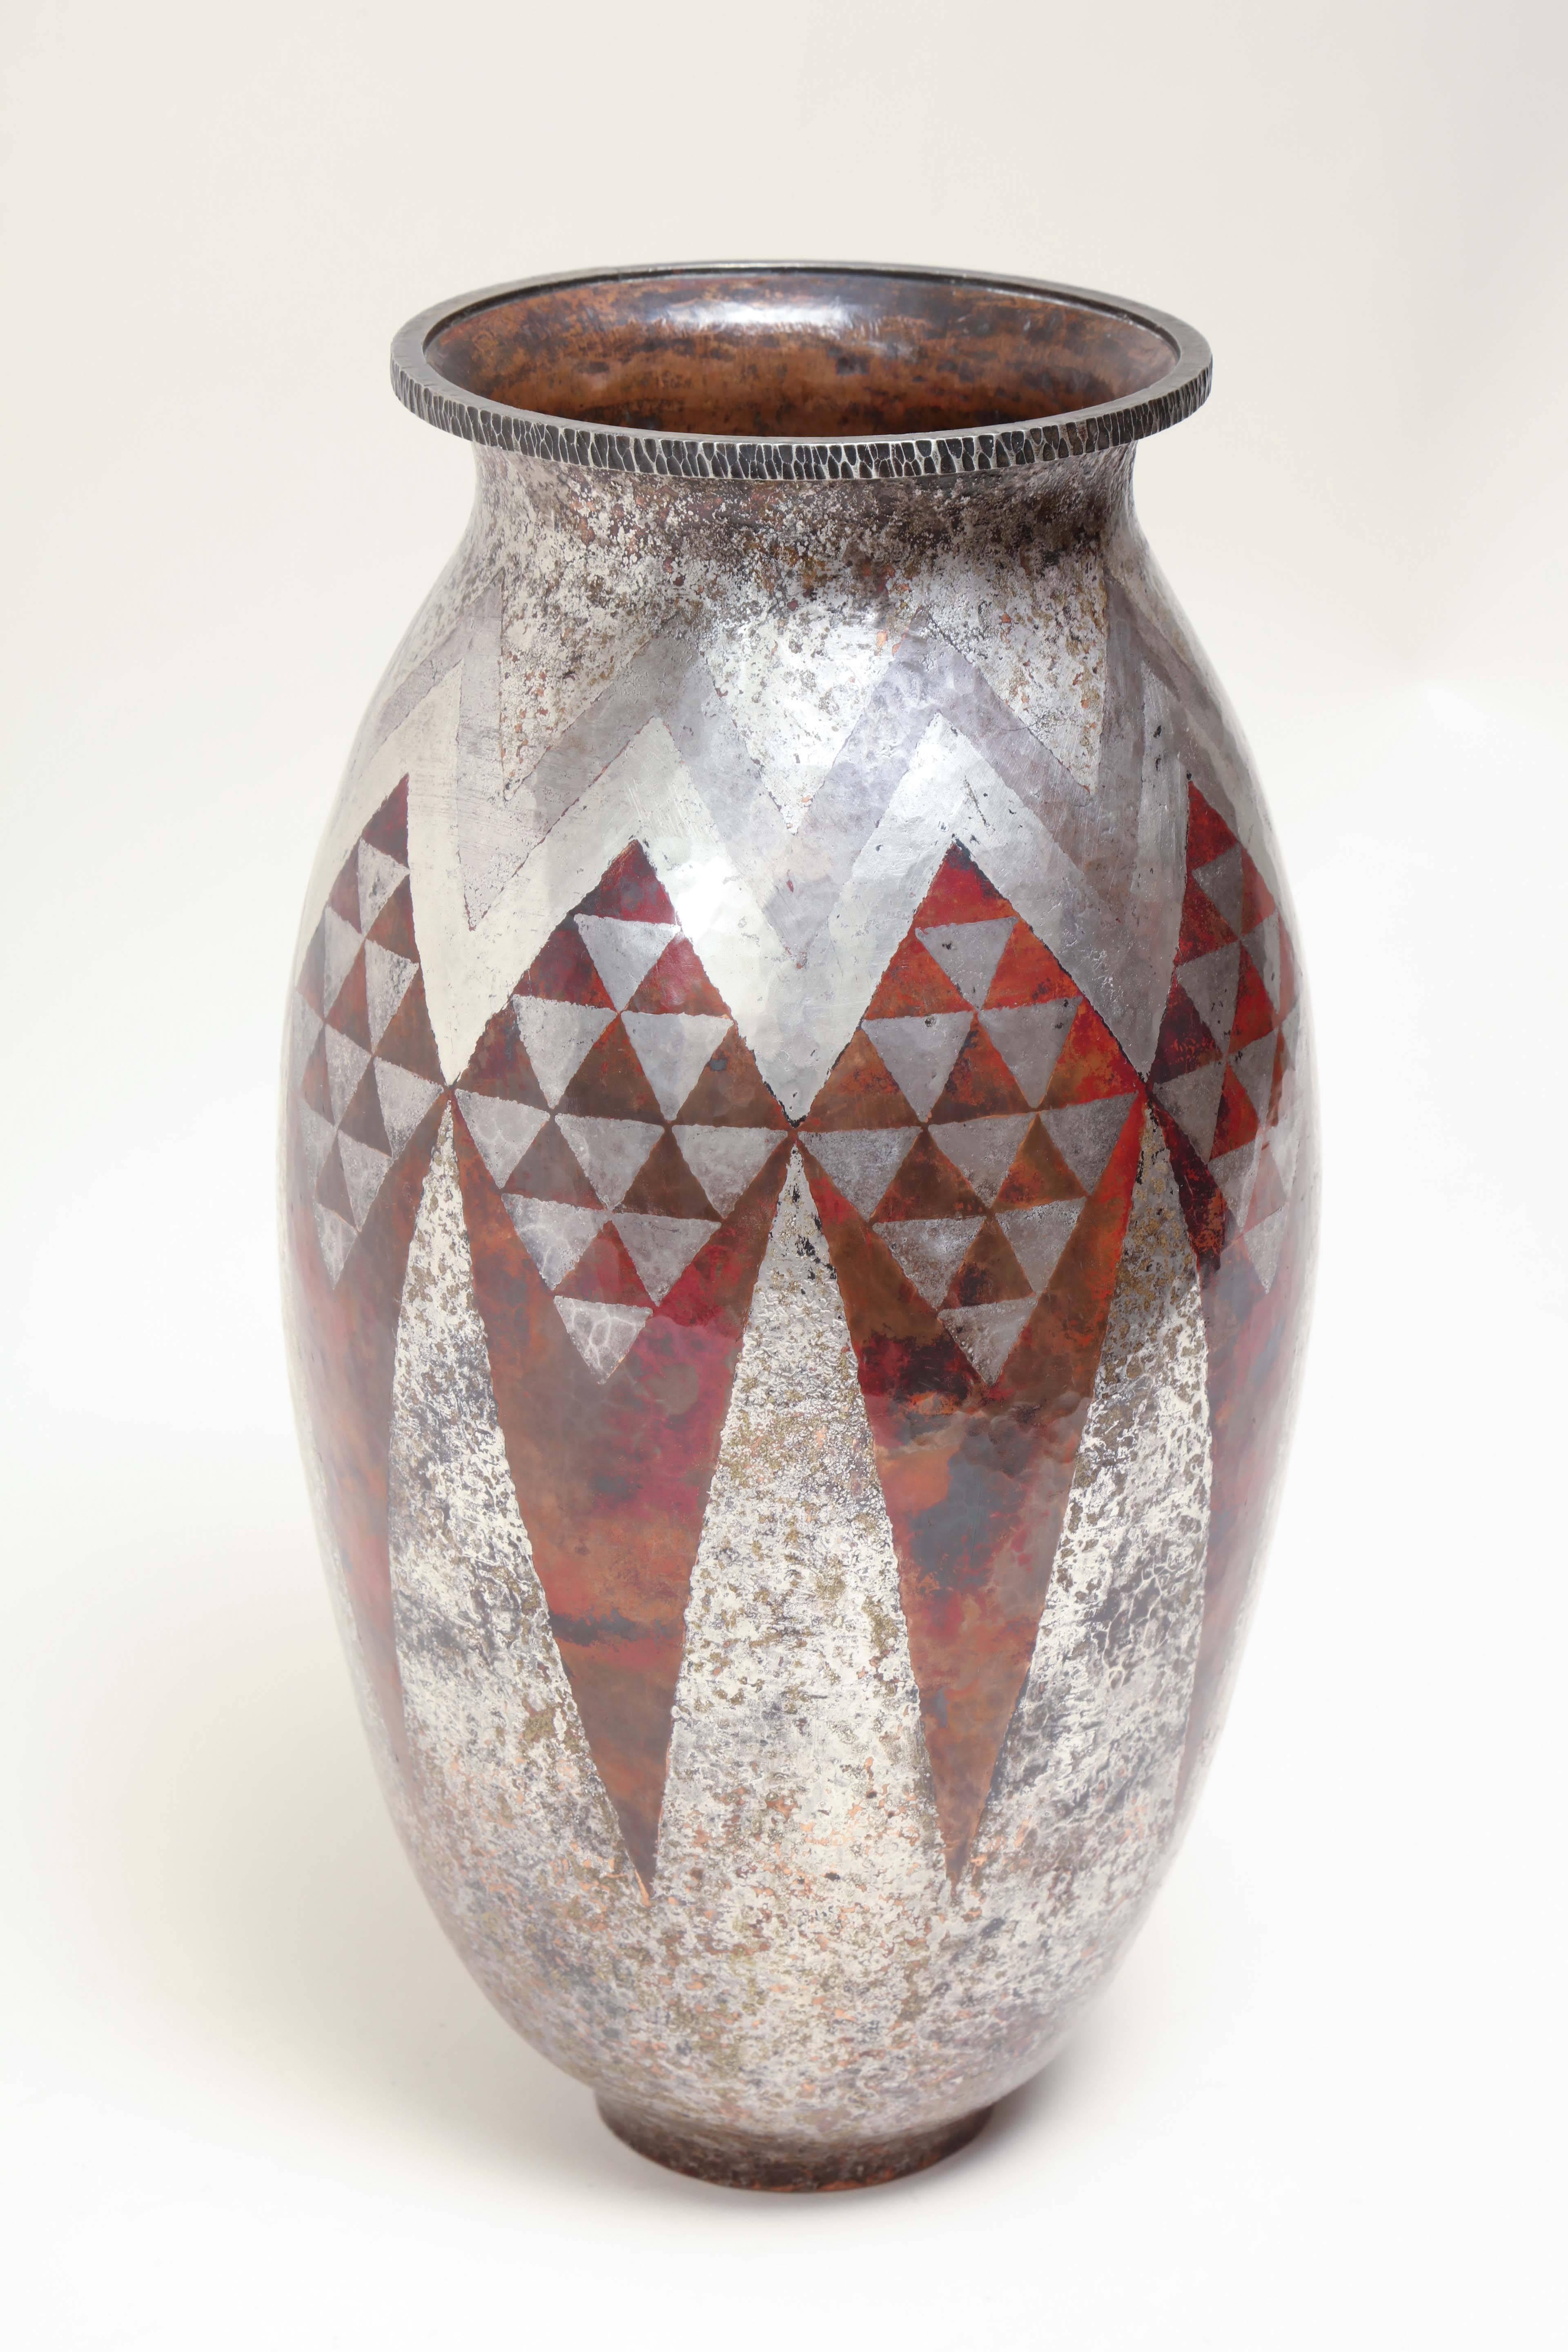 Copper and silver ovoid vase with a geometric design of triangles in red and silver.

Inscribed Cl Linossier underneath.
 